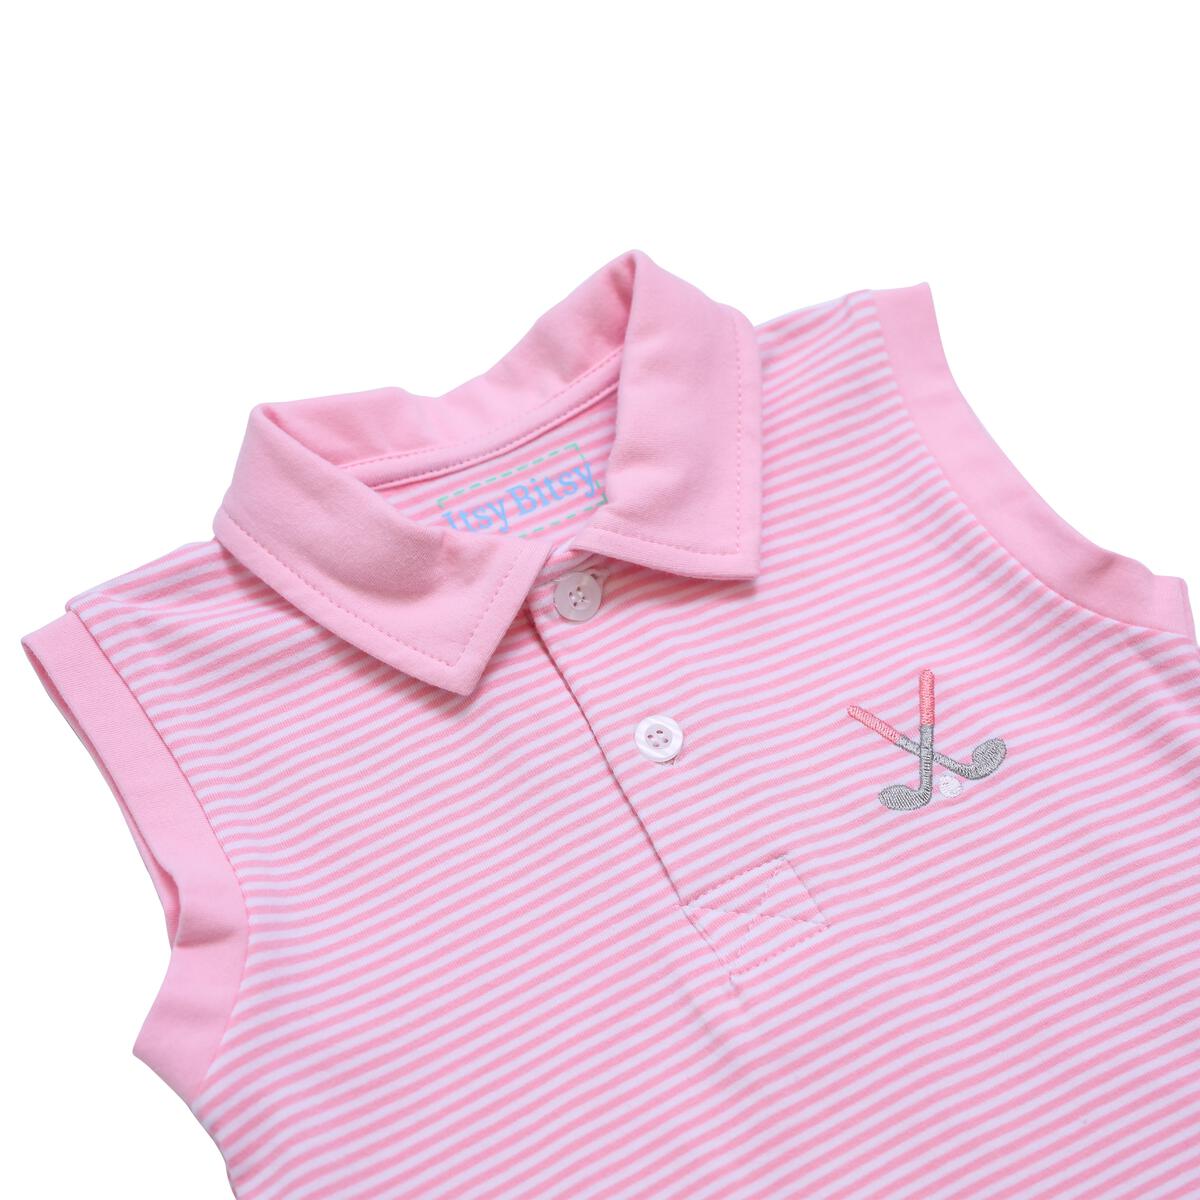 Polo Tank in Light Pink Golf  - Doodlebug's Children's Boutique